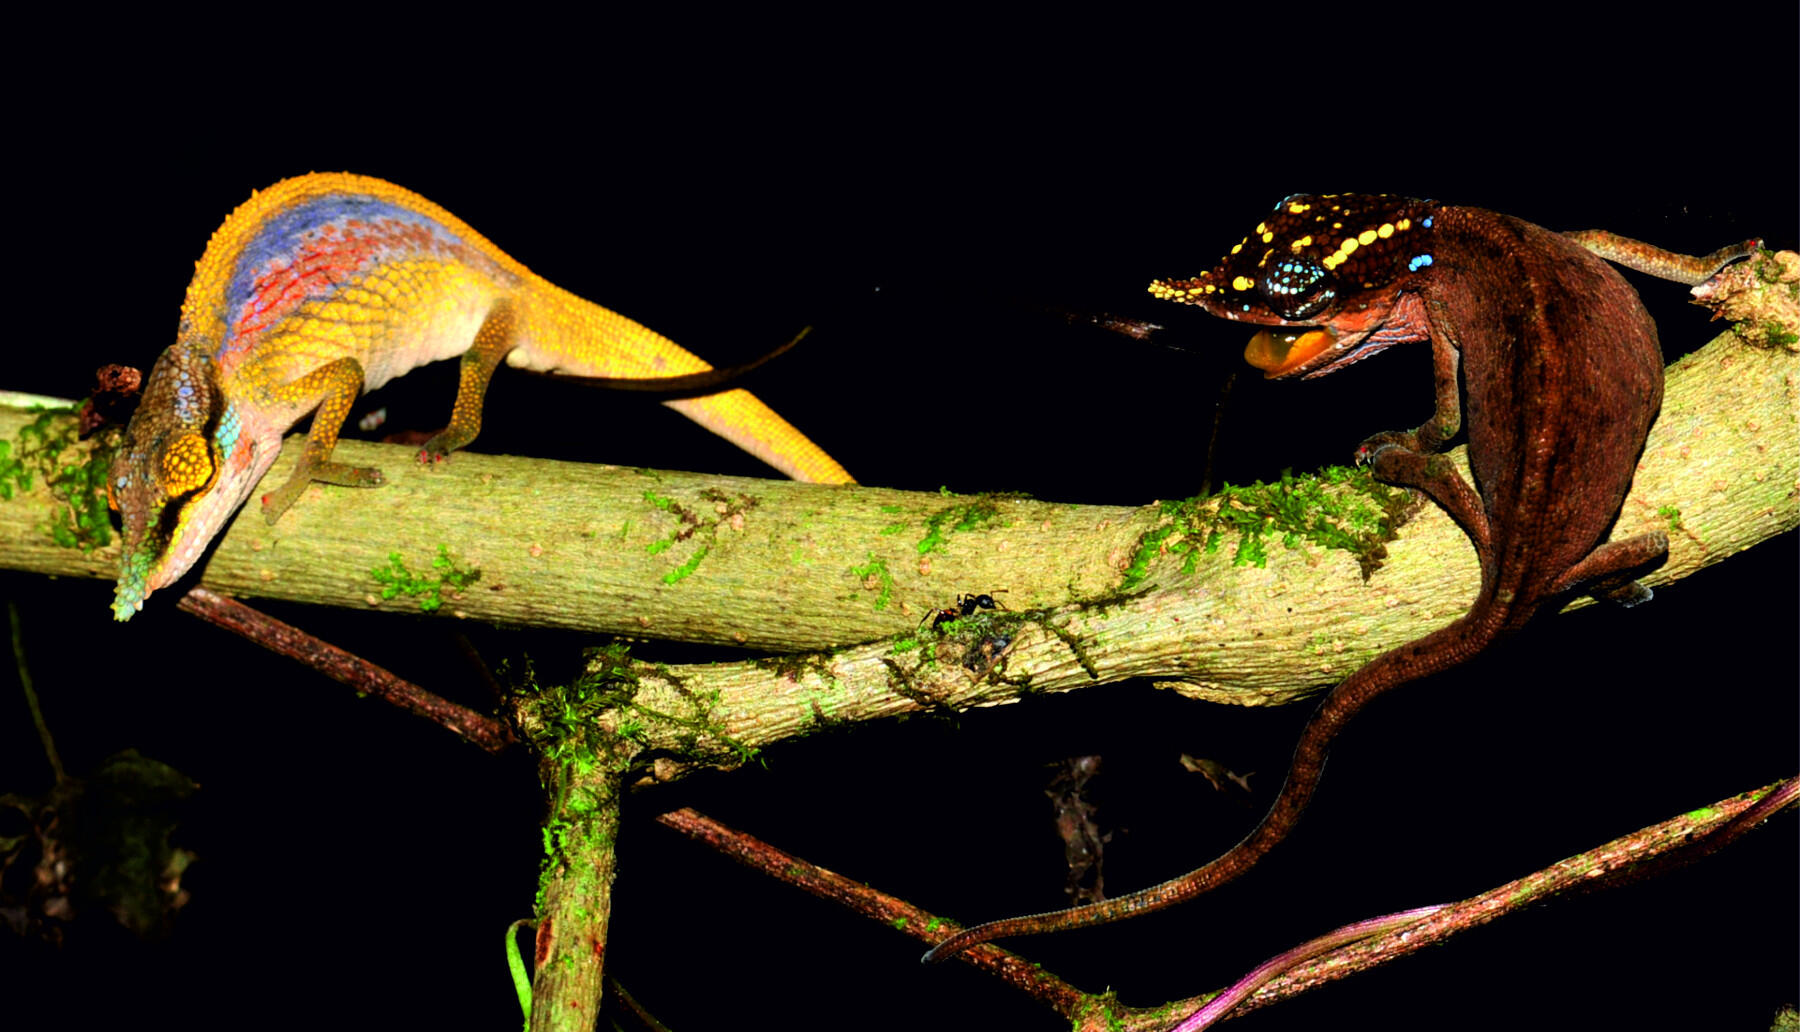 A male Calumma uetzi in spectacular display, with a female (right) in stress coloration, repelling the male. (Photo courtesy of Frank Glaw, Ph.D., Zoologische Staatssammlung München)